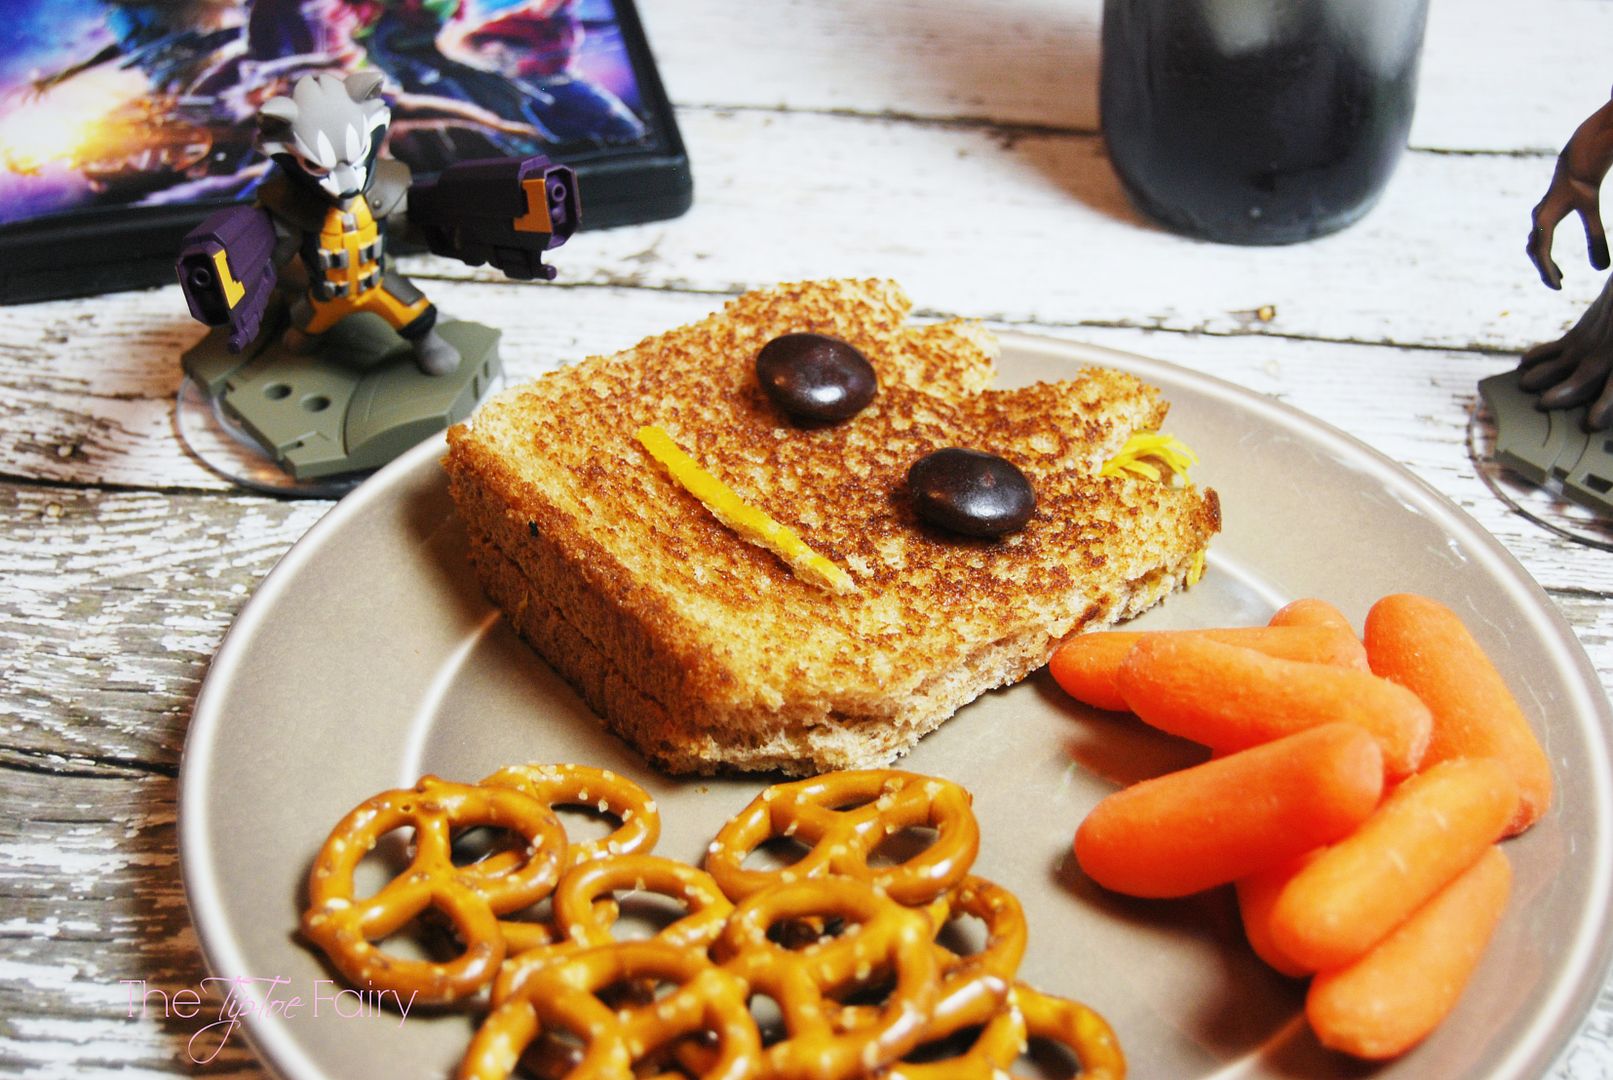 Guardians of the Galaxy Theme Family Movie Night with Groot grilled turkey and cheese sandwiches and layered Gamora drinks | THe TipToe Fairy #OwntheGalaxy #ad